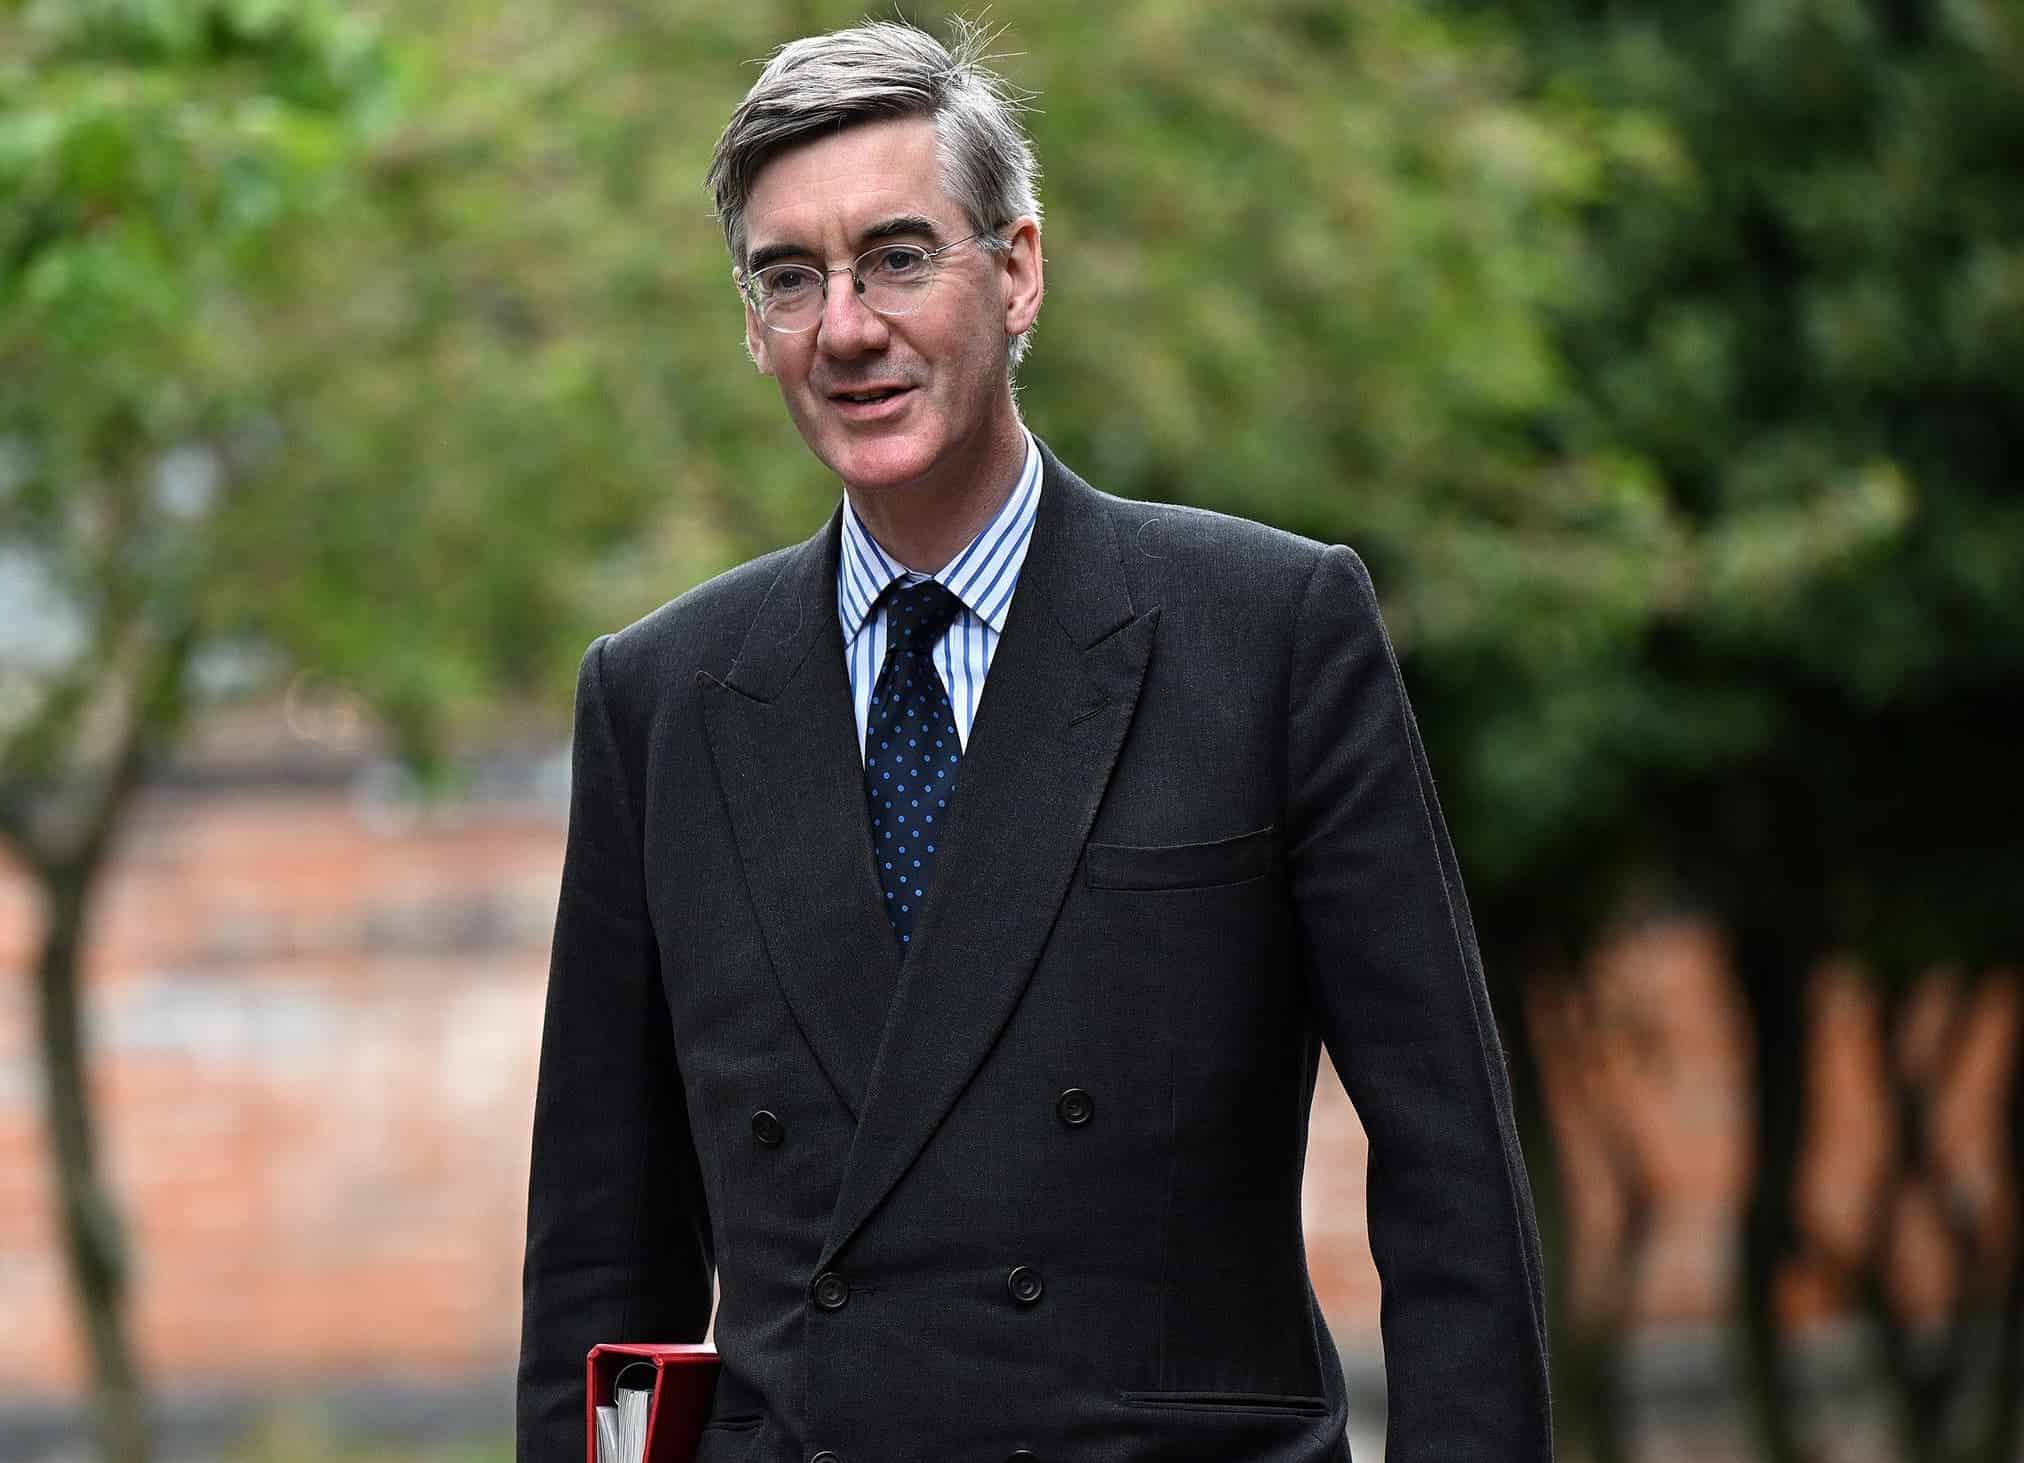 Rich Londoners are having to pay more for their nannies and one assumes Rees-Mogg isn’t happy about it